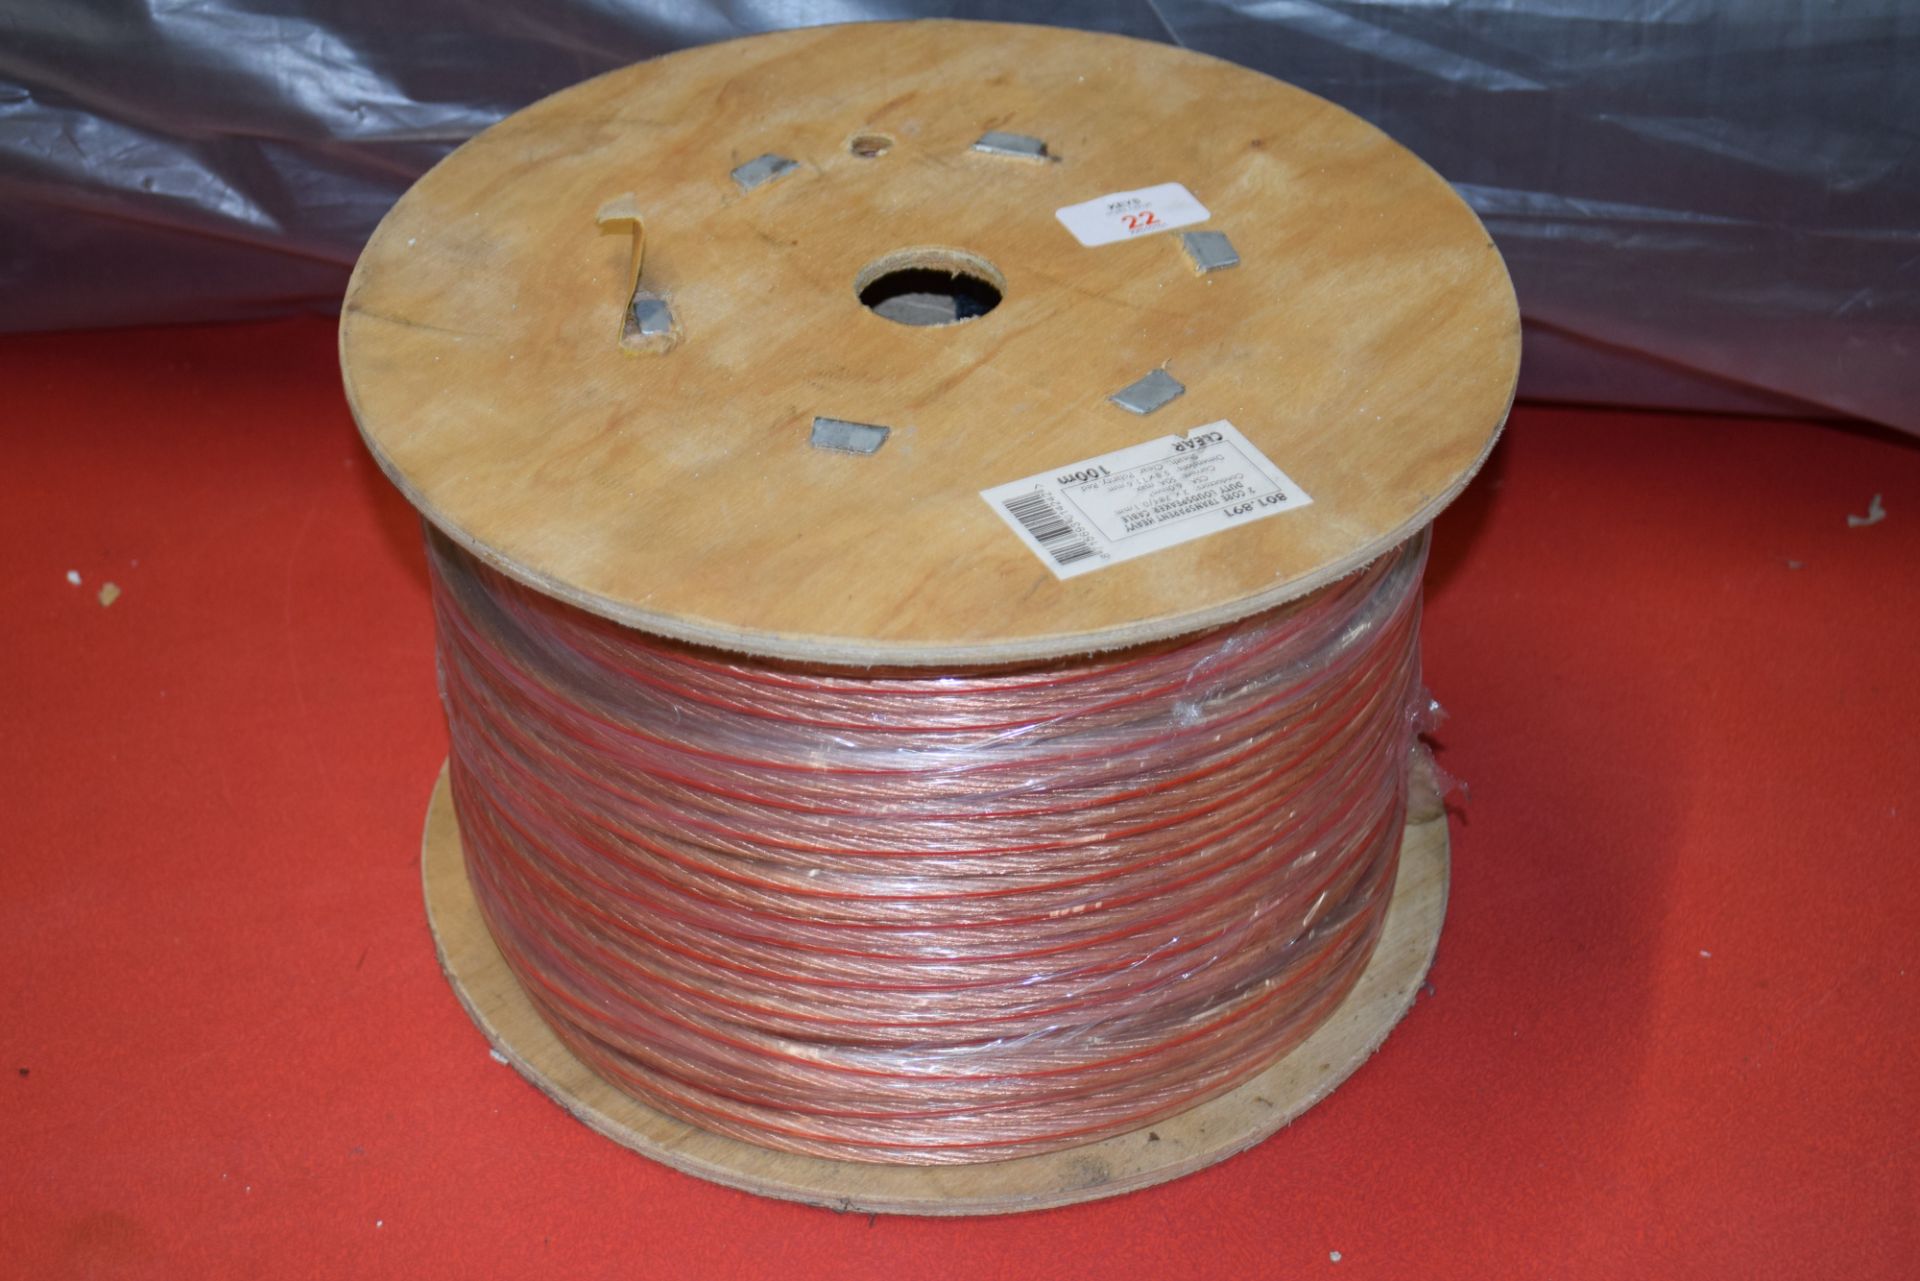 REEL OF TWO CORE TRANSPARENT HEAVY DUTY LOUDSPEAKER CABLE, APPROX 100M, CURRENT 50AMP MAX